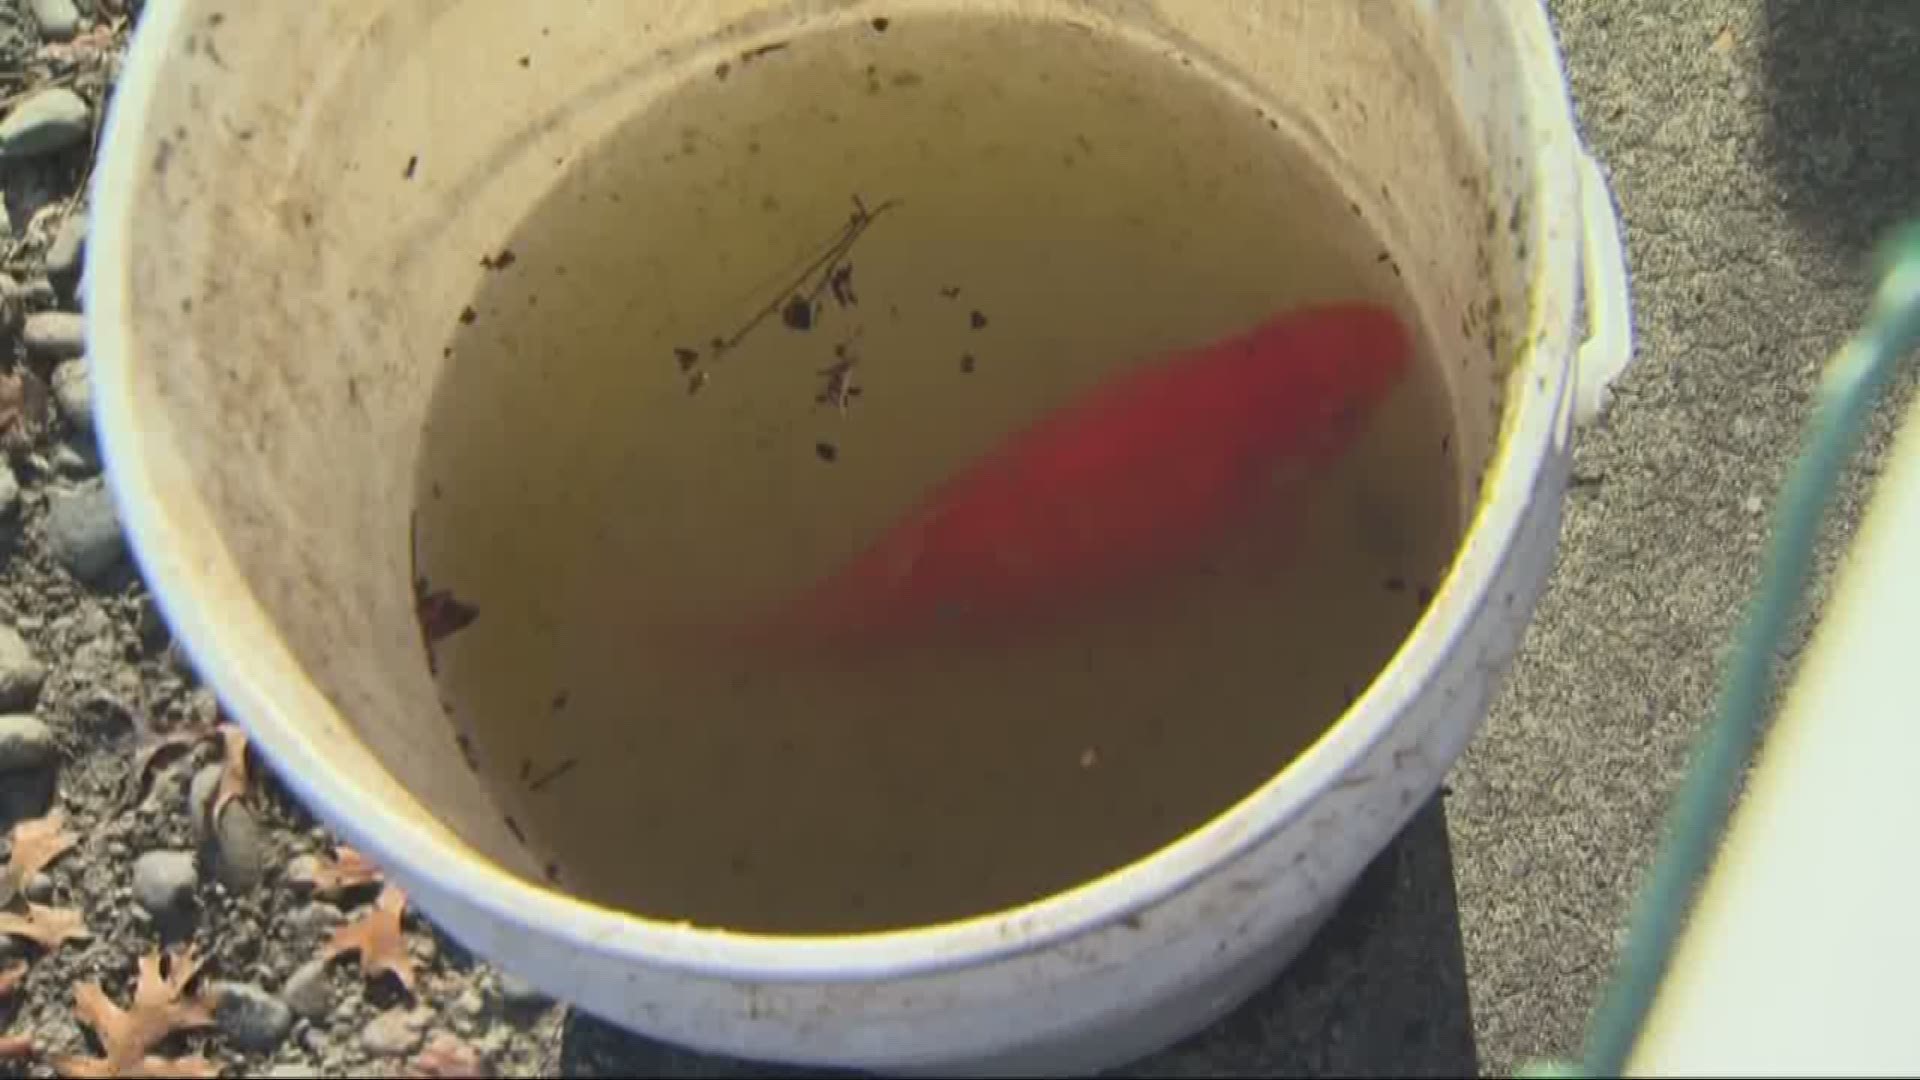 City of Tualatin, citizens save goldfish in Commons lake